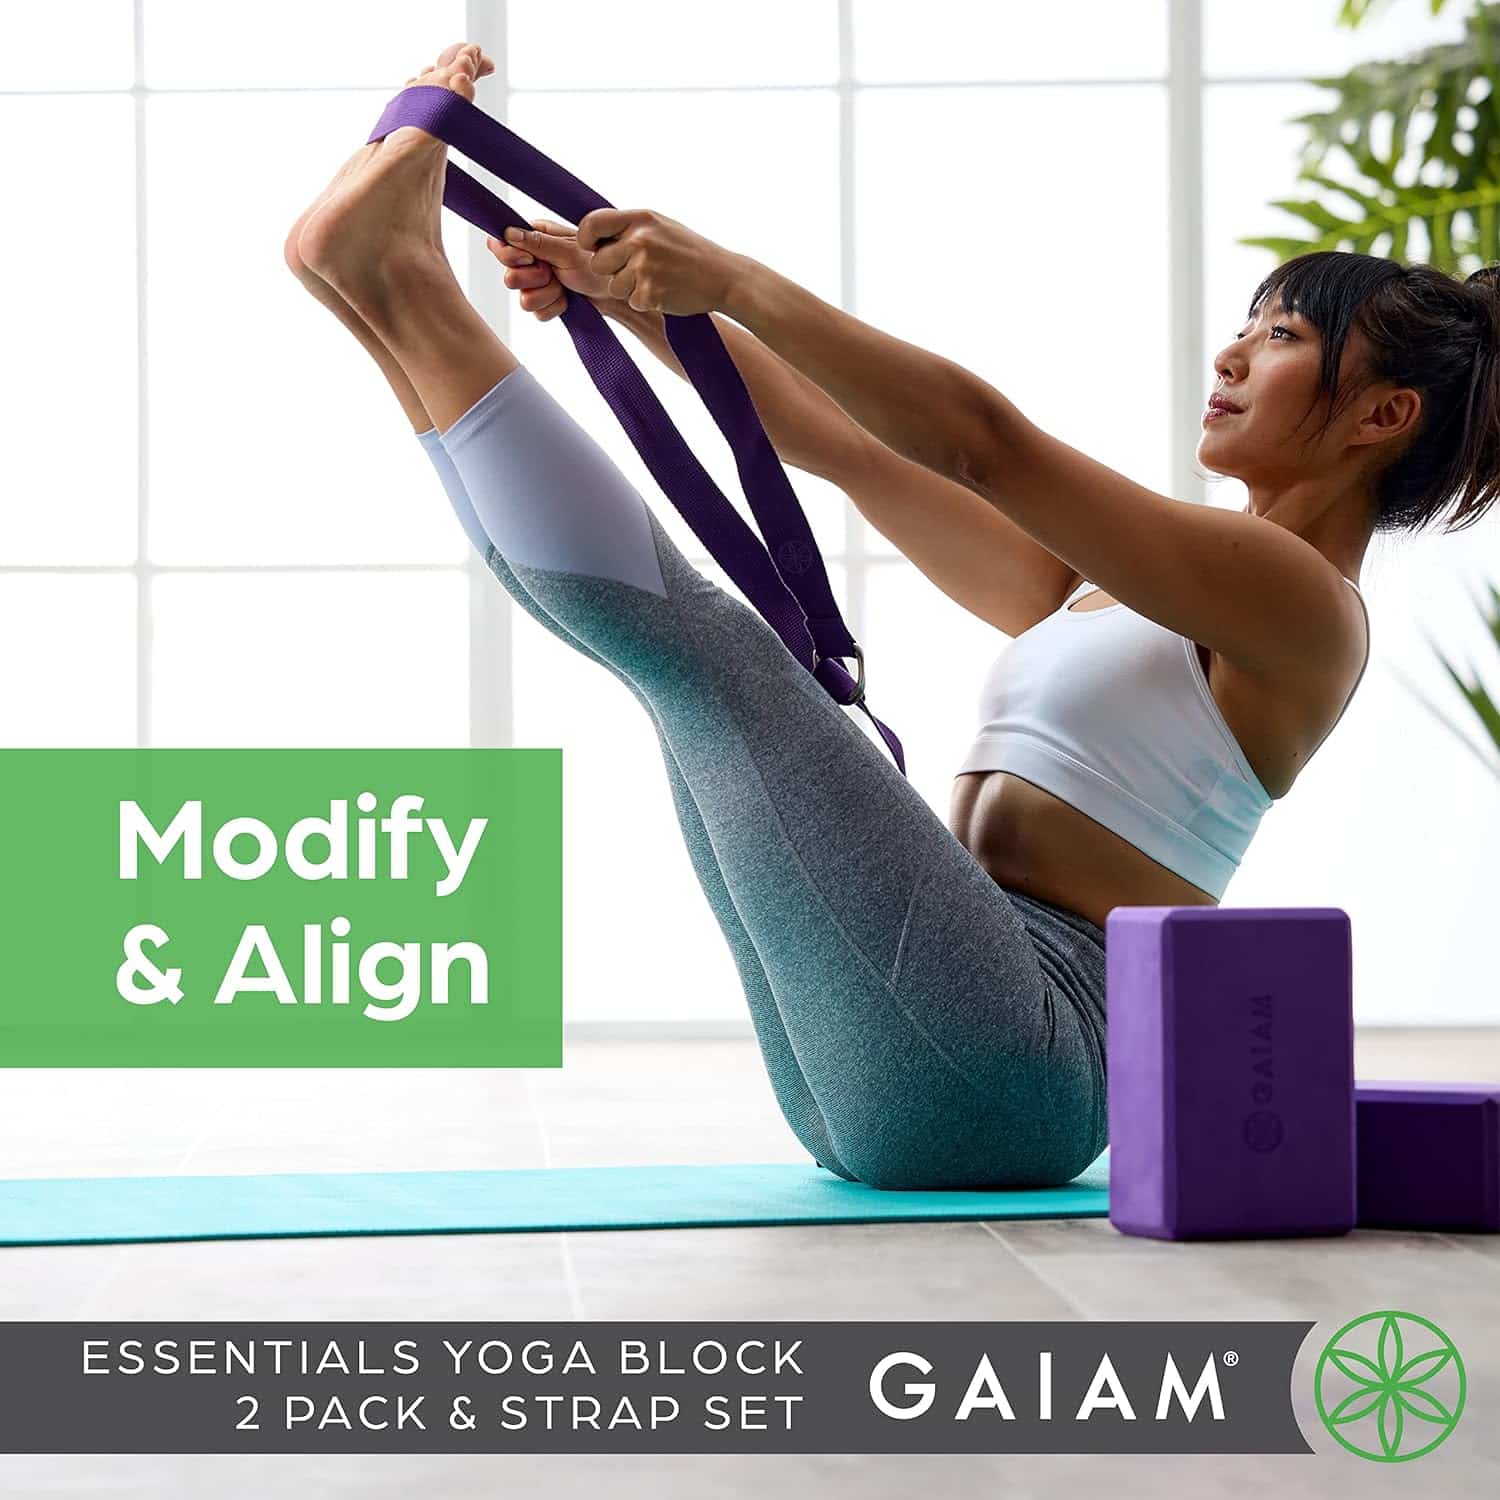 Gaiam Essentials Yoga: A Comprehensive Review on the Ultimate Yoga Companion for Beginners and Advanced Users